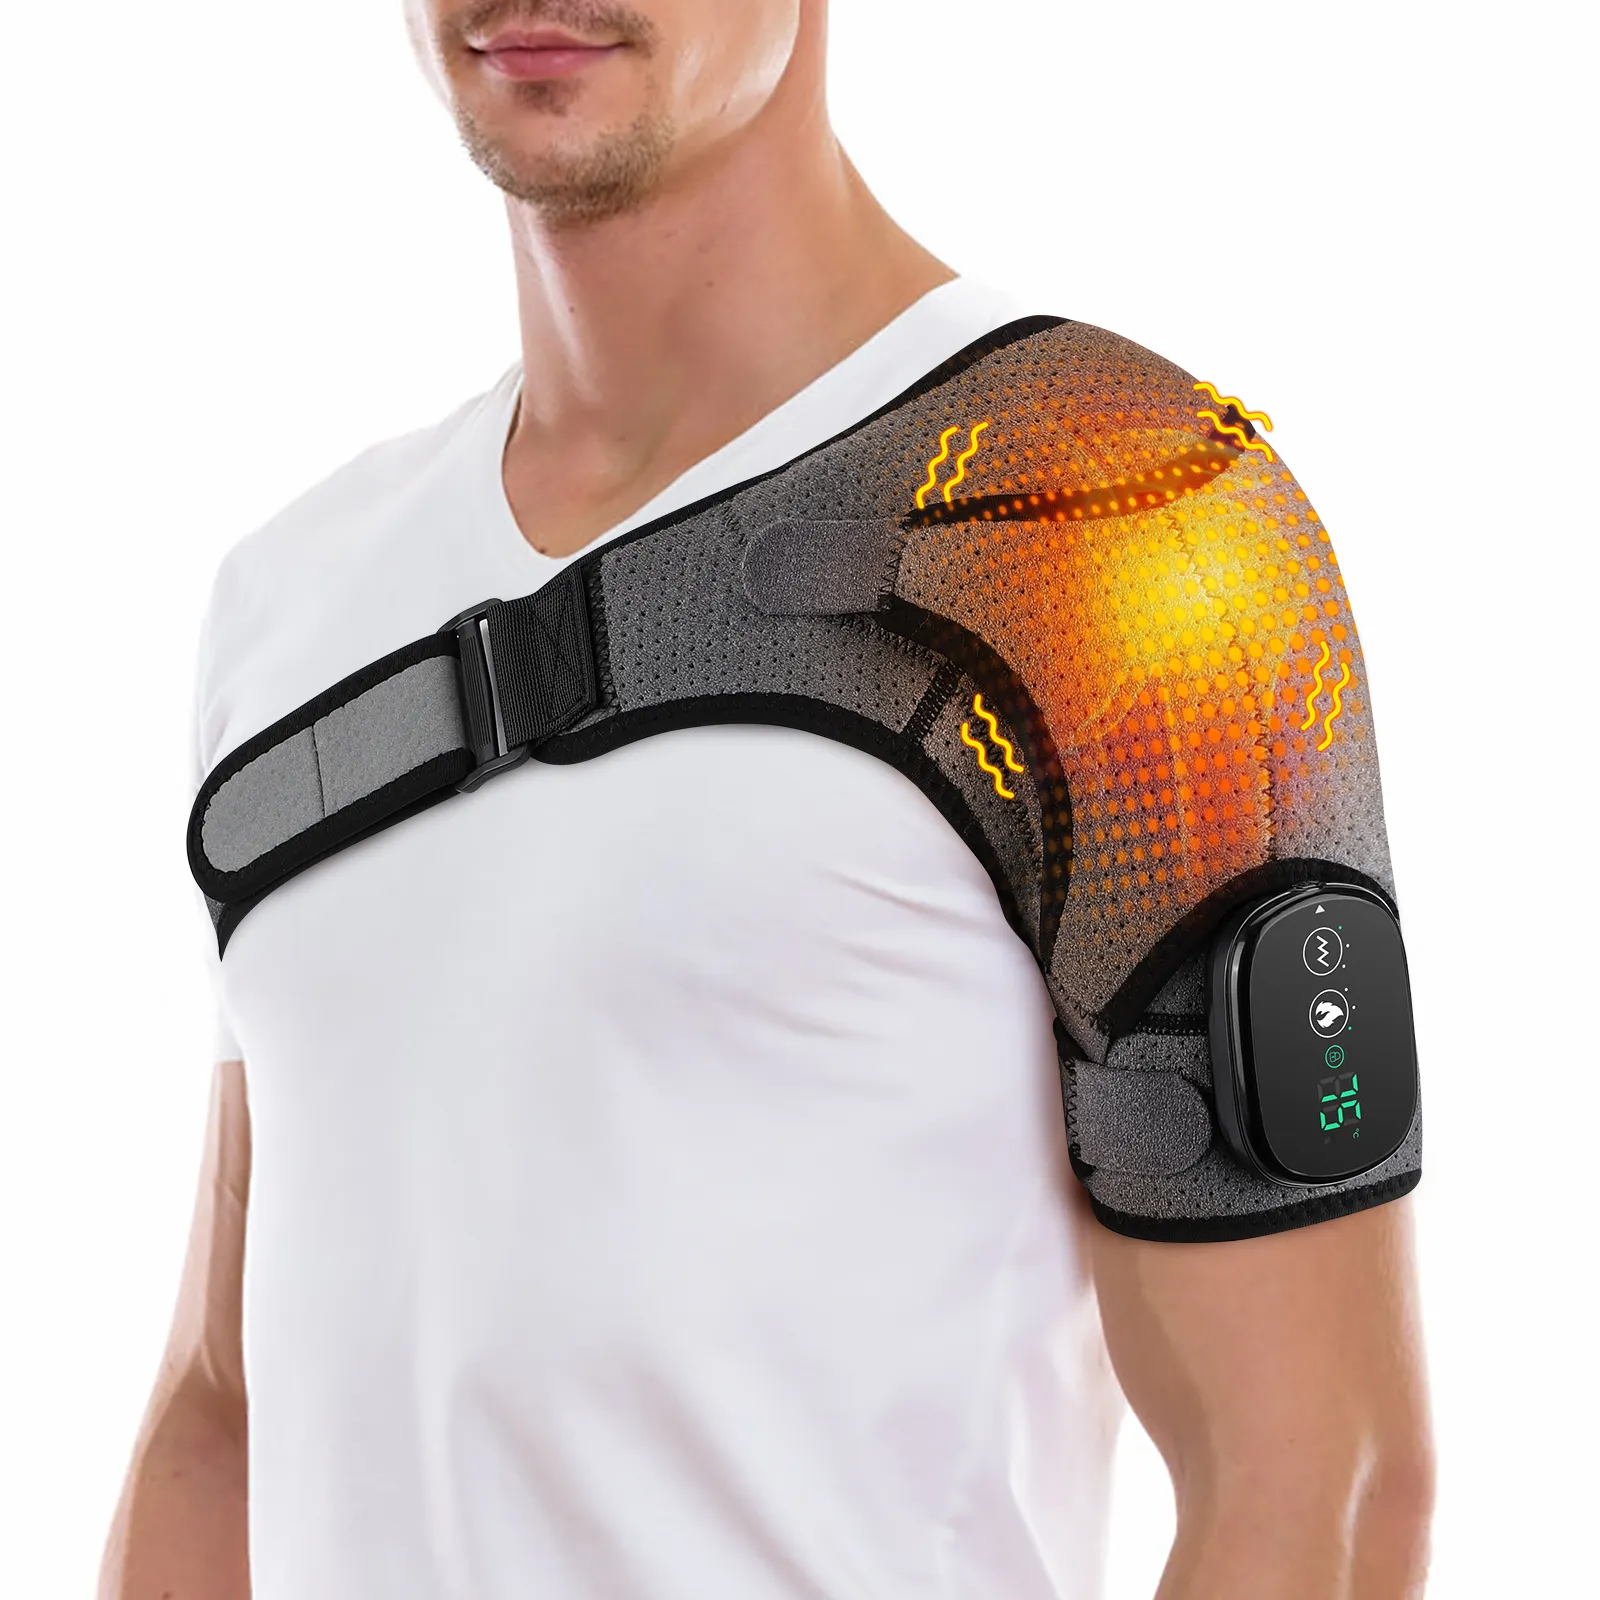 Infrared Therapy Heating Vibration Shoulder Massager Wrap Belt for Arthritis Pain Relief